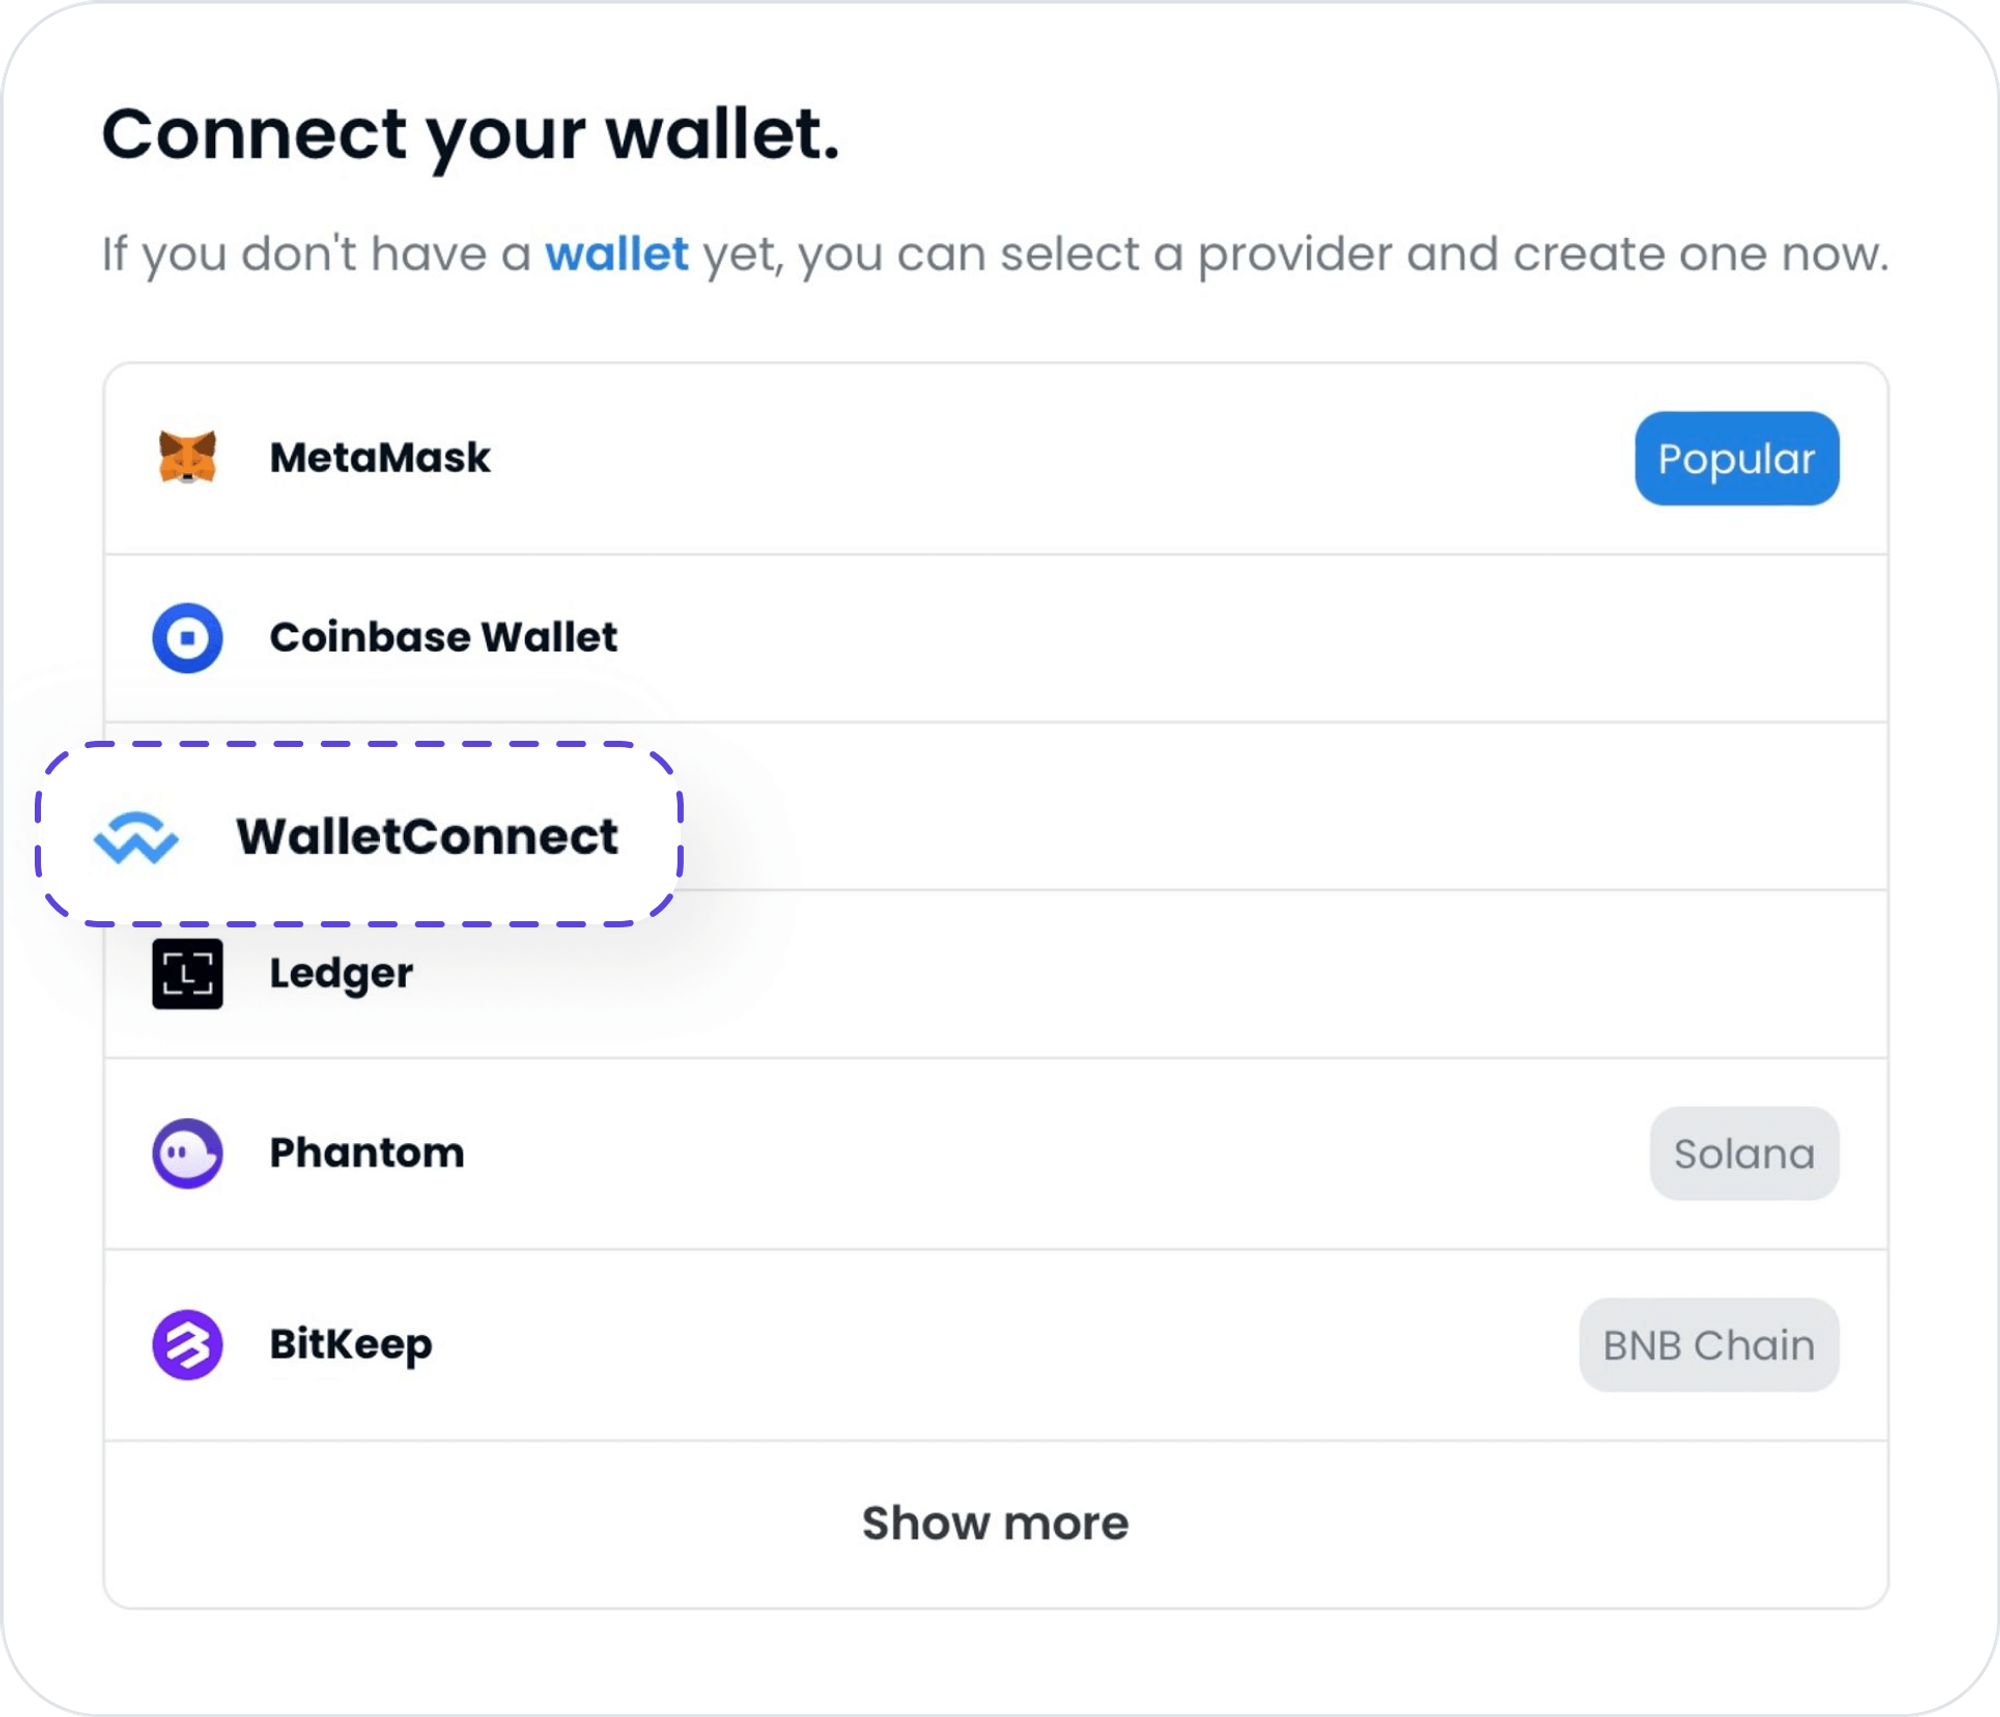 This is the page to connect your wallet in OpenSea. Press 'Wallet Connect' to connect Buritto Wallet.